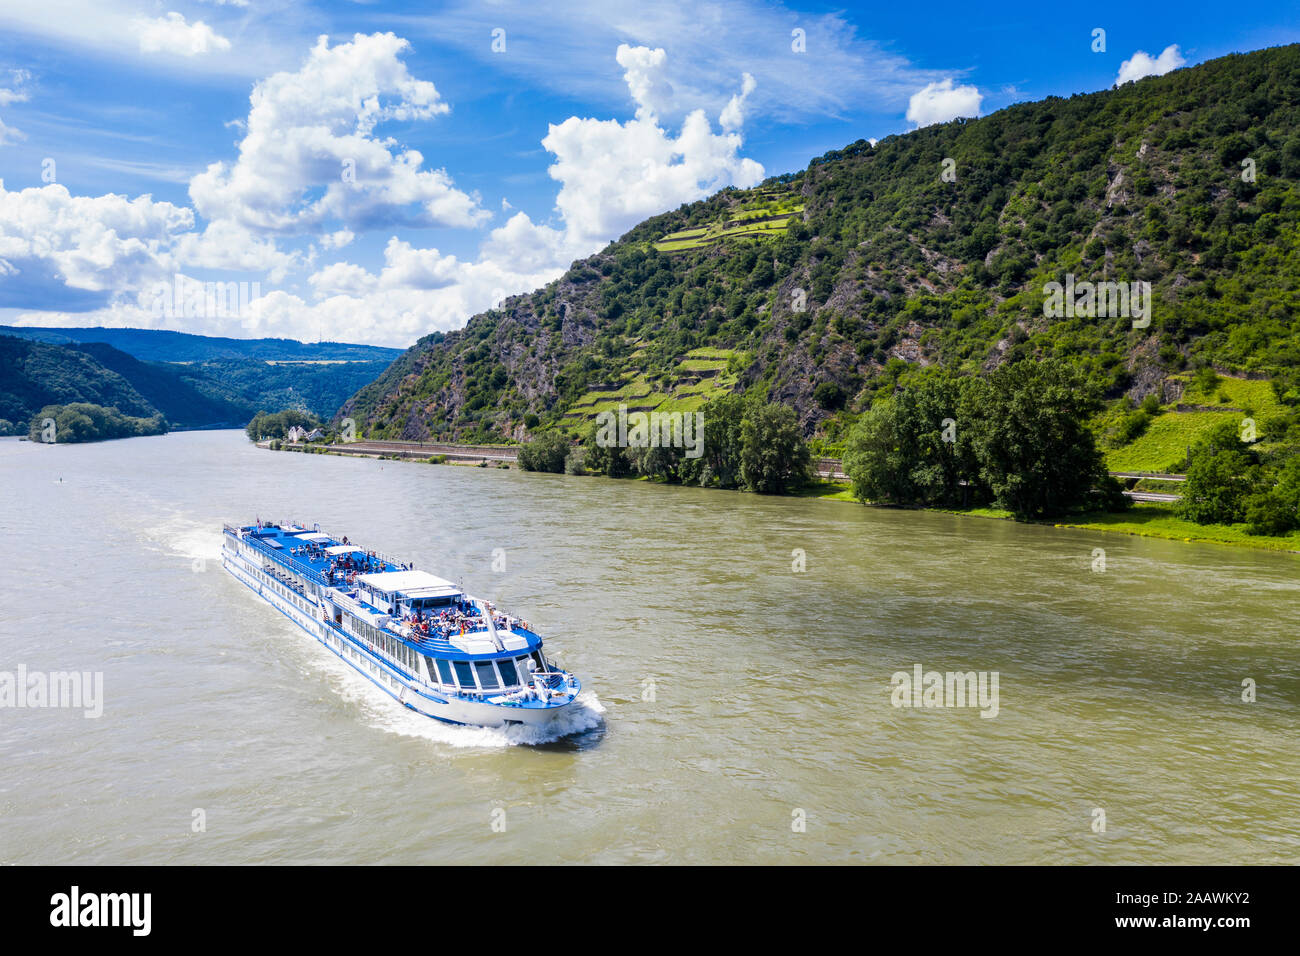 Aerial view of cruise ship on Rhine river by mountain at Boppard, Germany Stock Photo